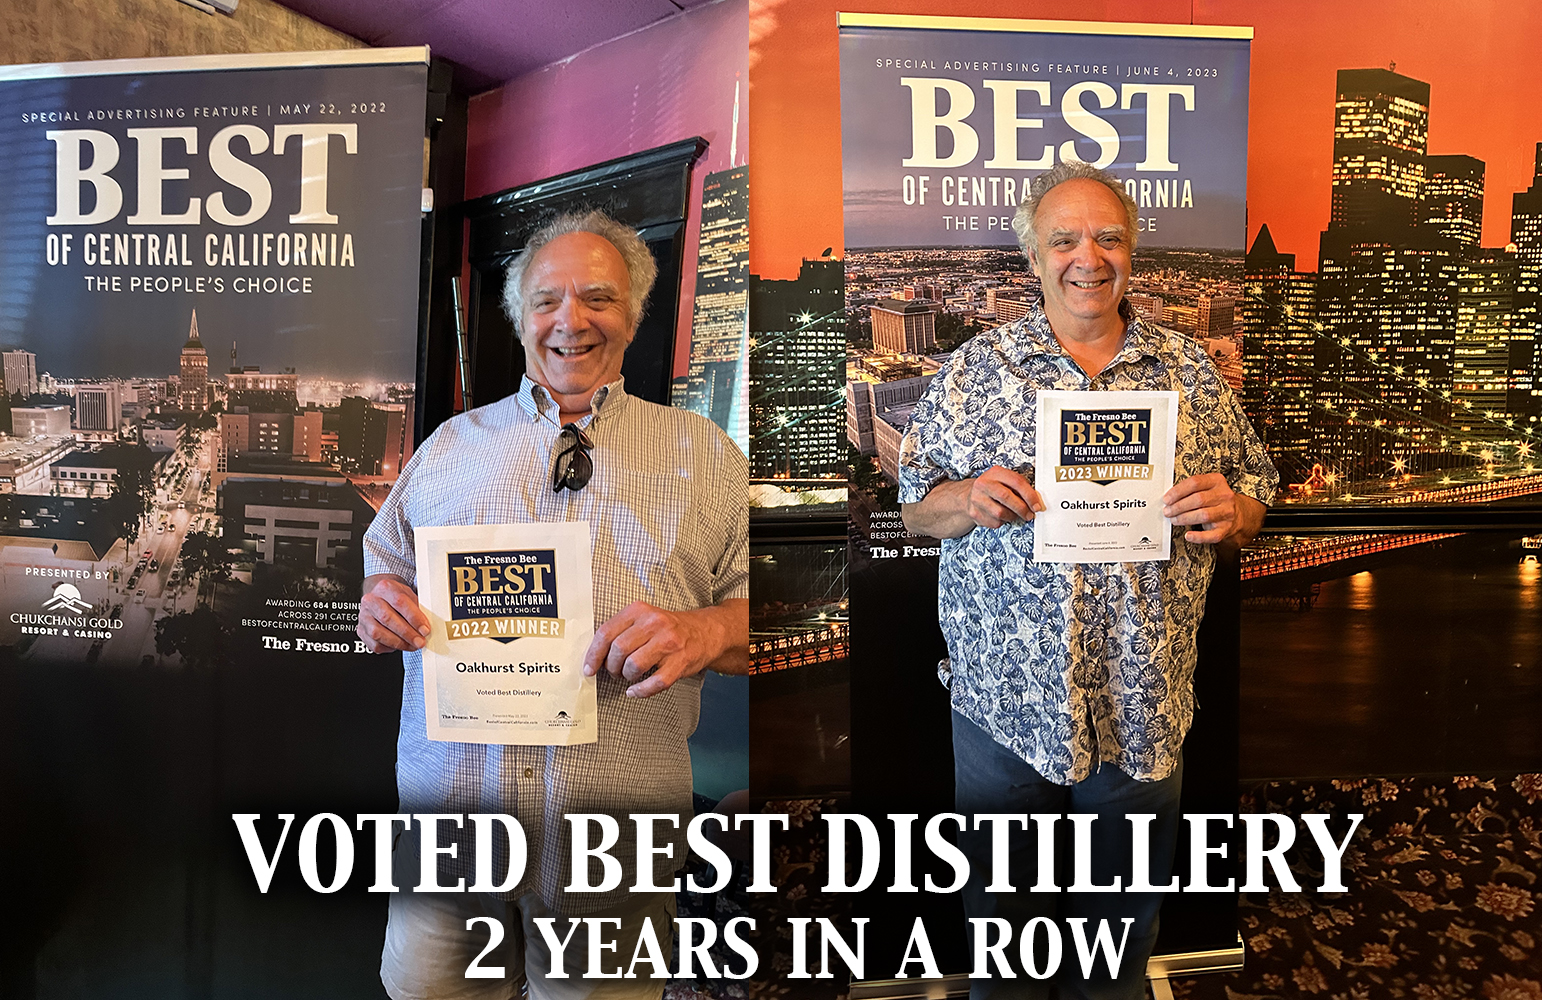 Voted Best Distillery 2 years in a row! Owner Mike Benbrook with award